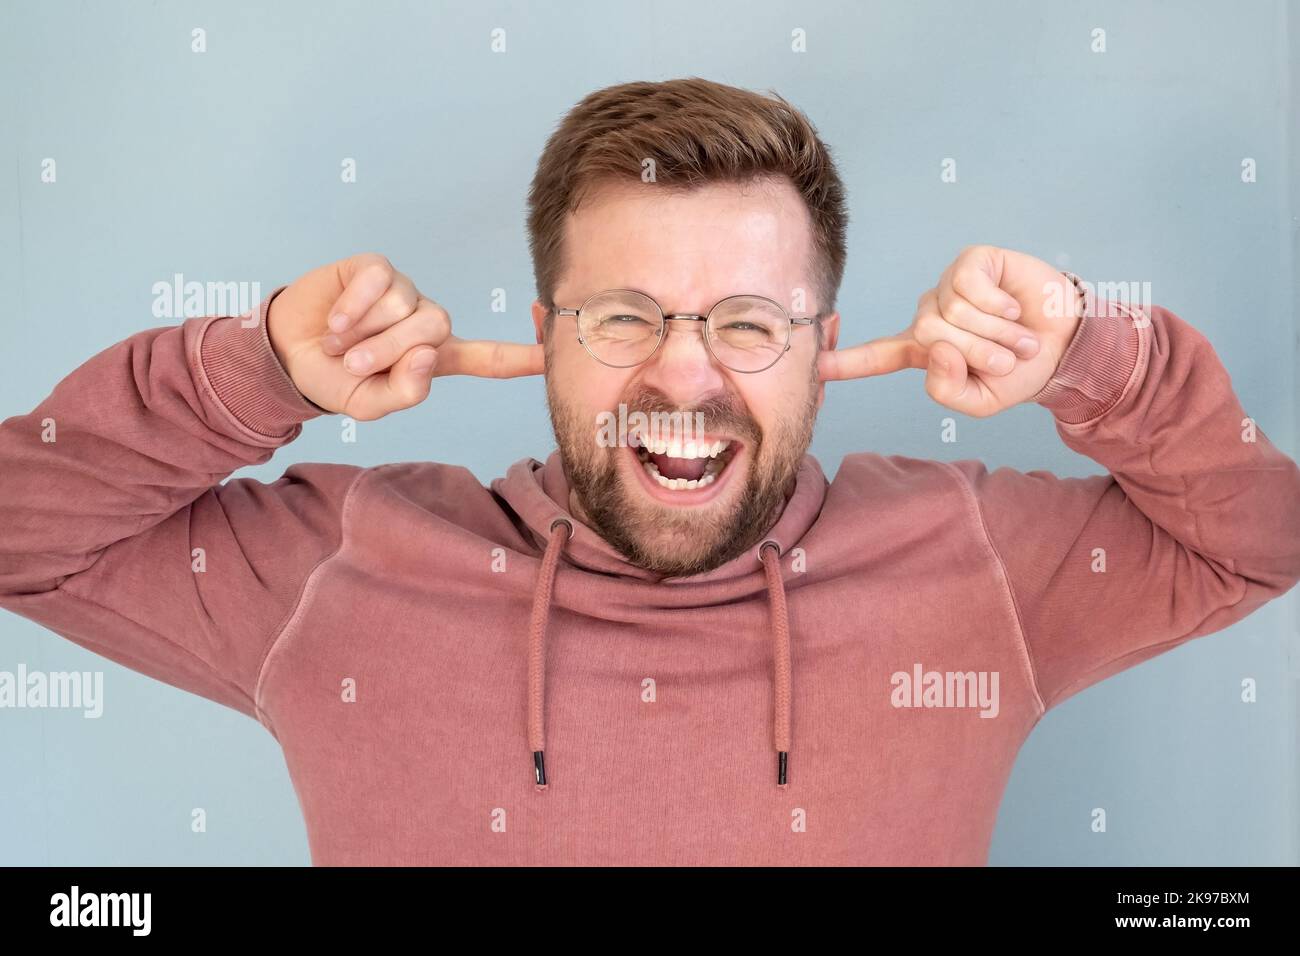 Happy man covered ears with fingers while standing on a blue background. Stock Photo